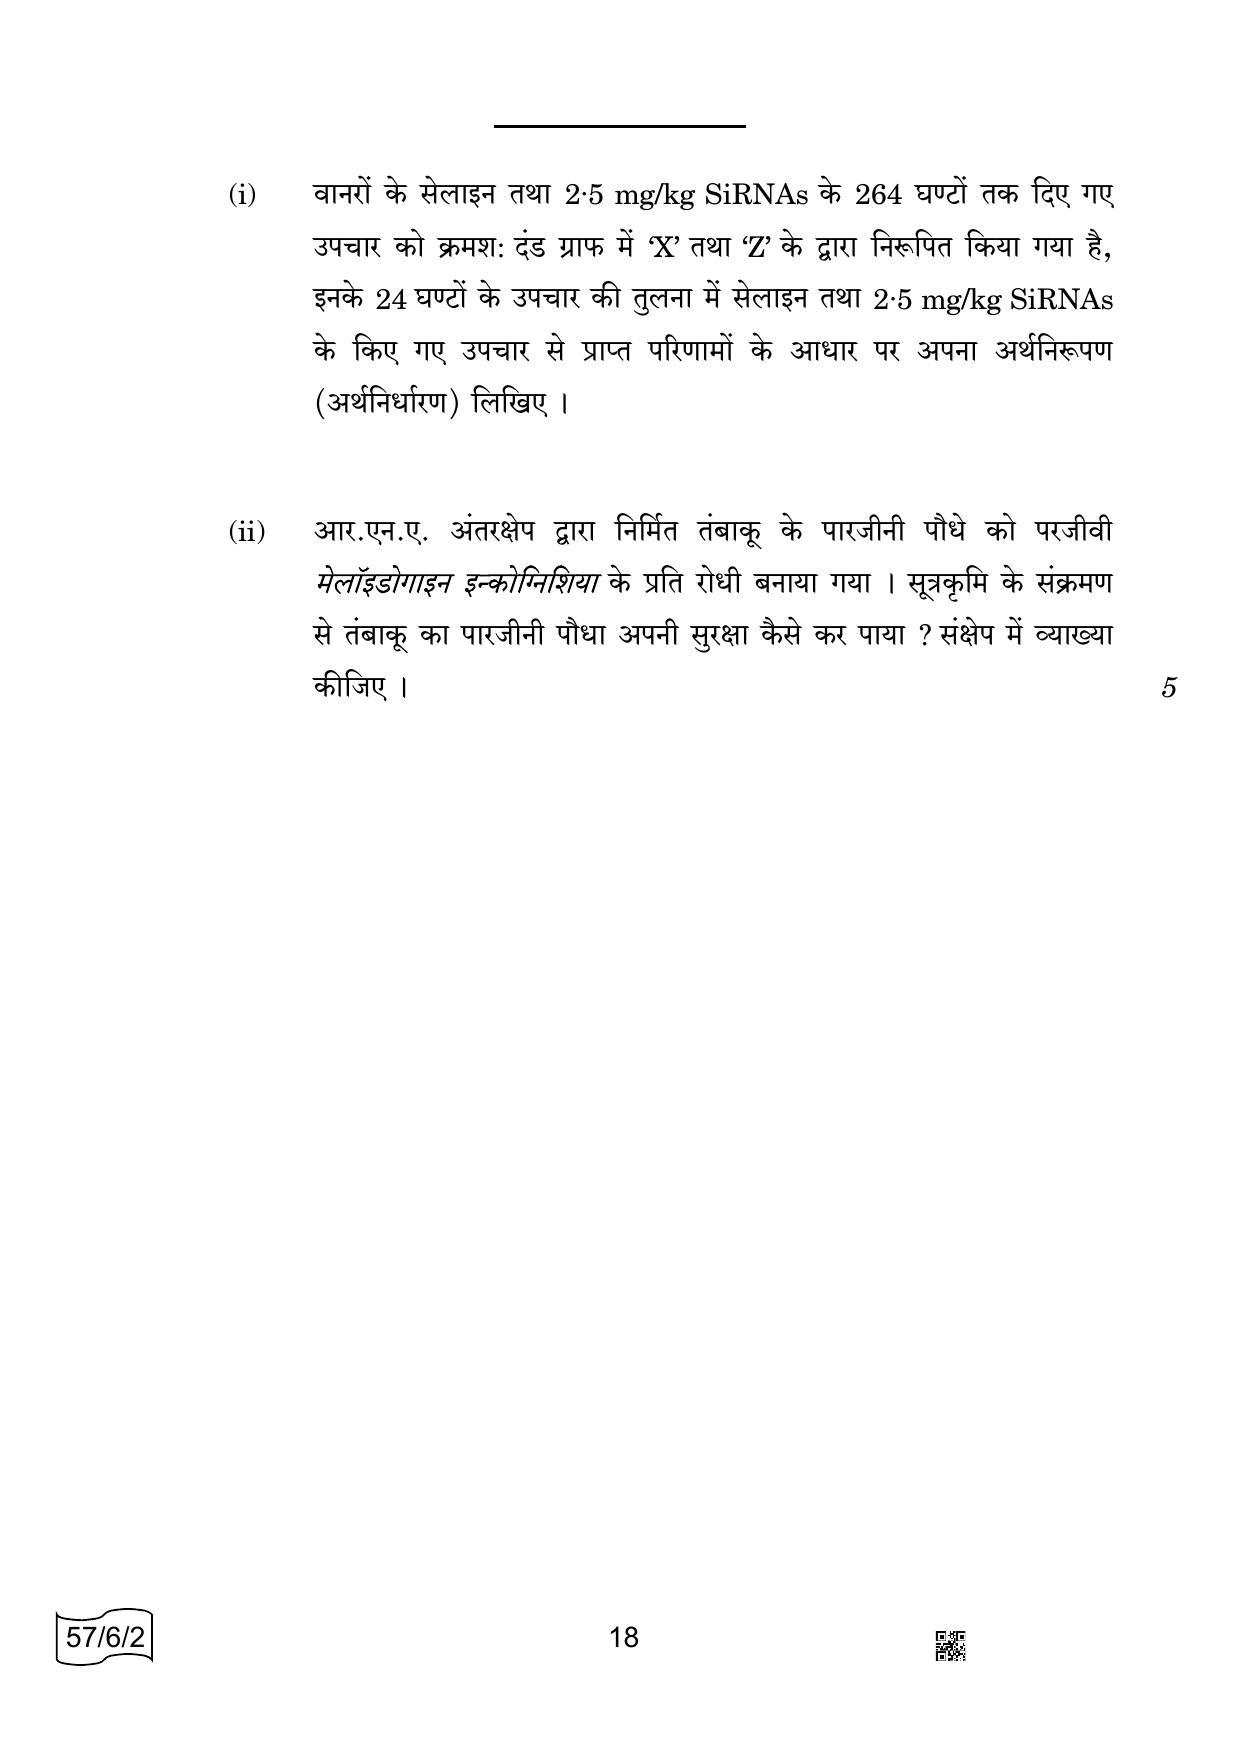 CBSE Class 12 57-6-2 BIOLOGY 2022 Compartment Question Paper - Page 18